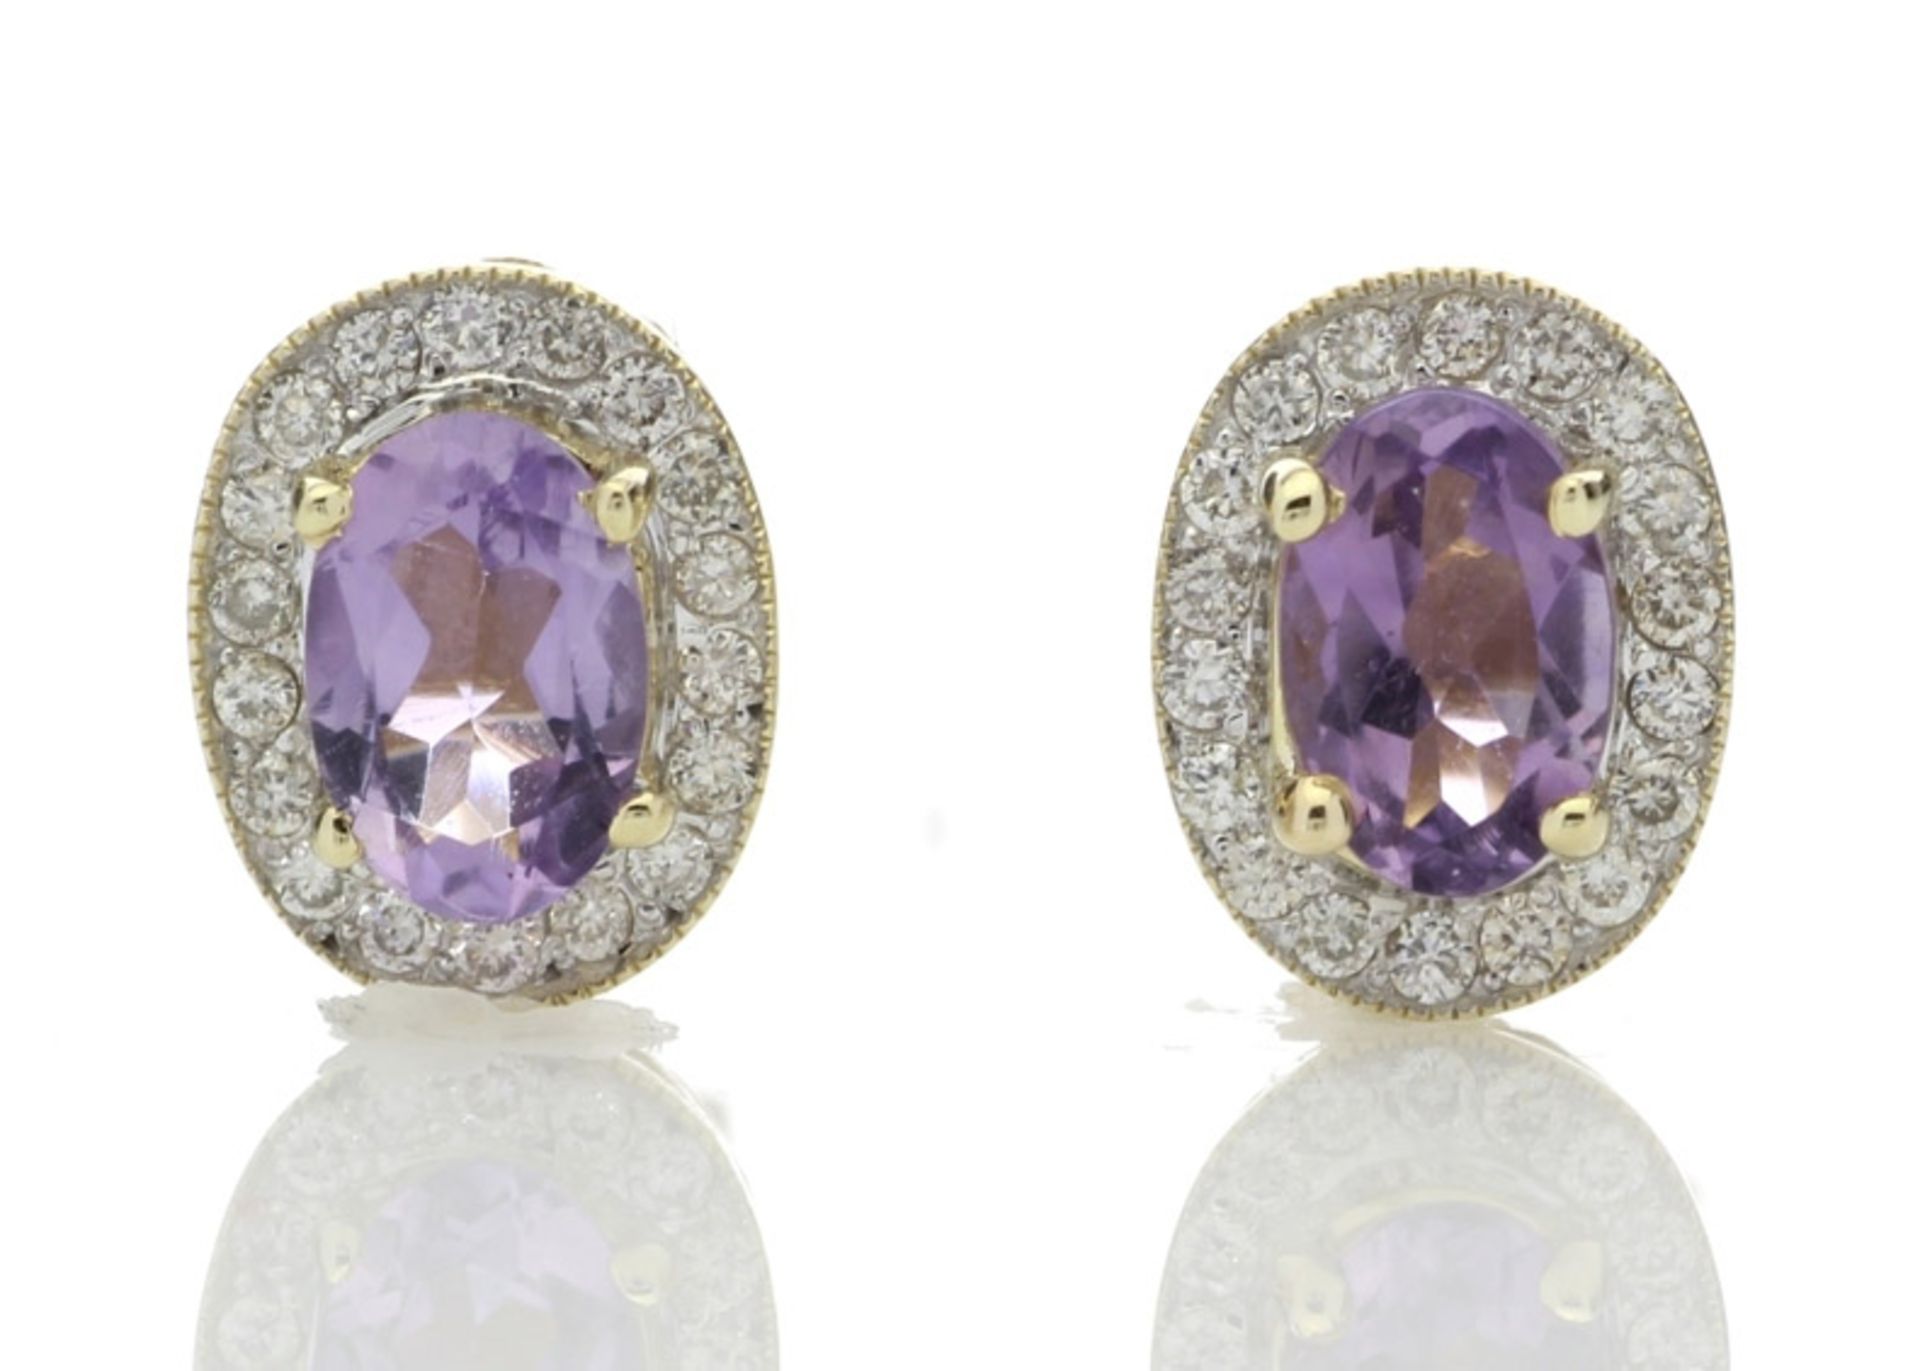 9ct Yellow Gold Amethyst and Diamond Cluster Earring 0.18 Carats - Valued by GIE £1,879.00 - 9ct